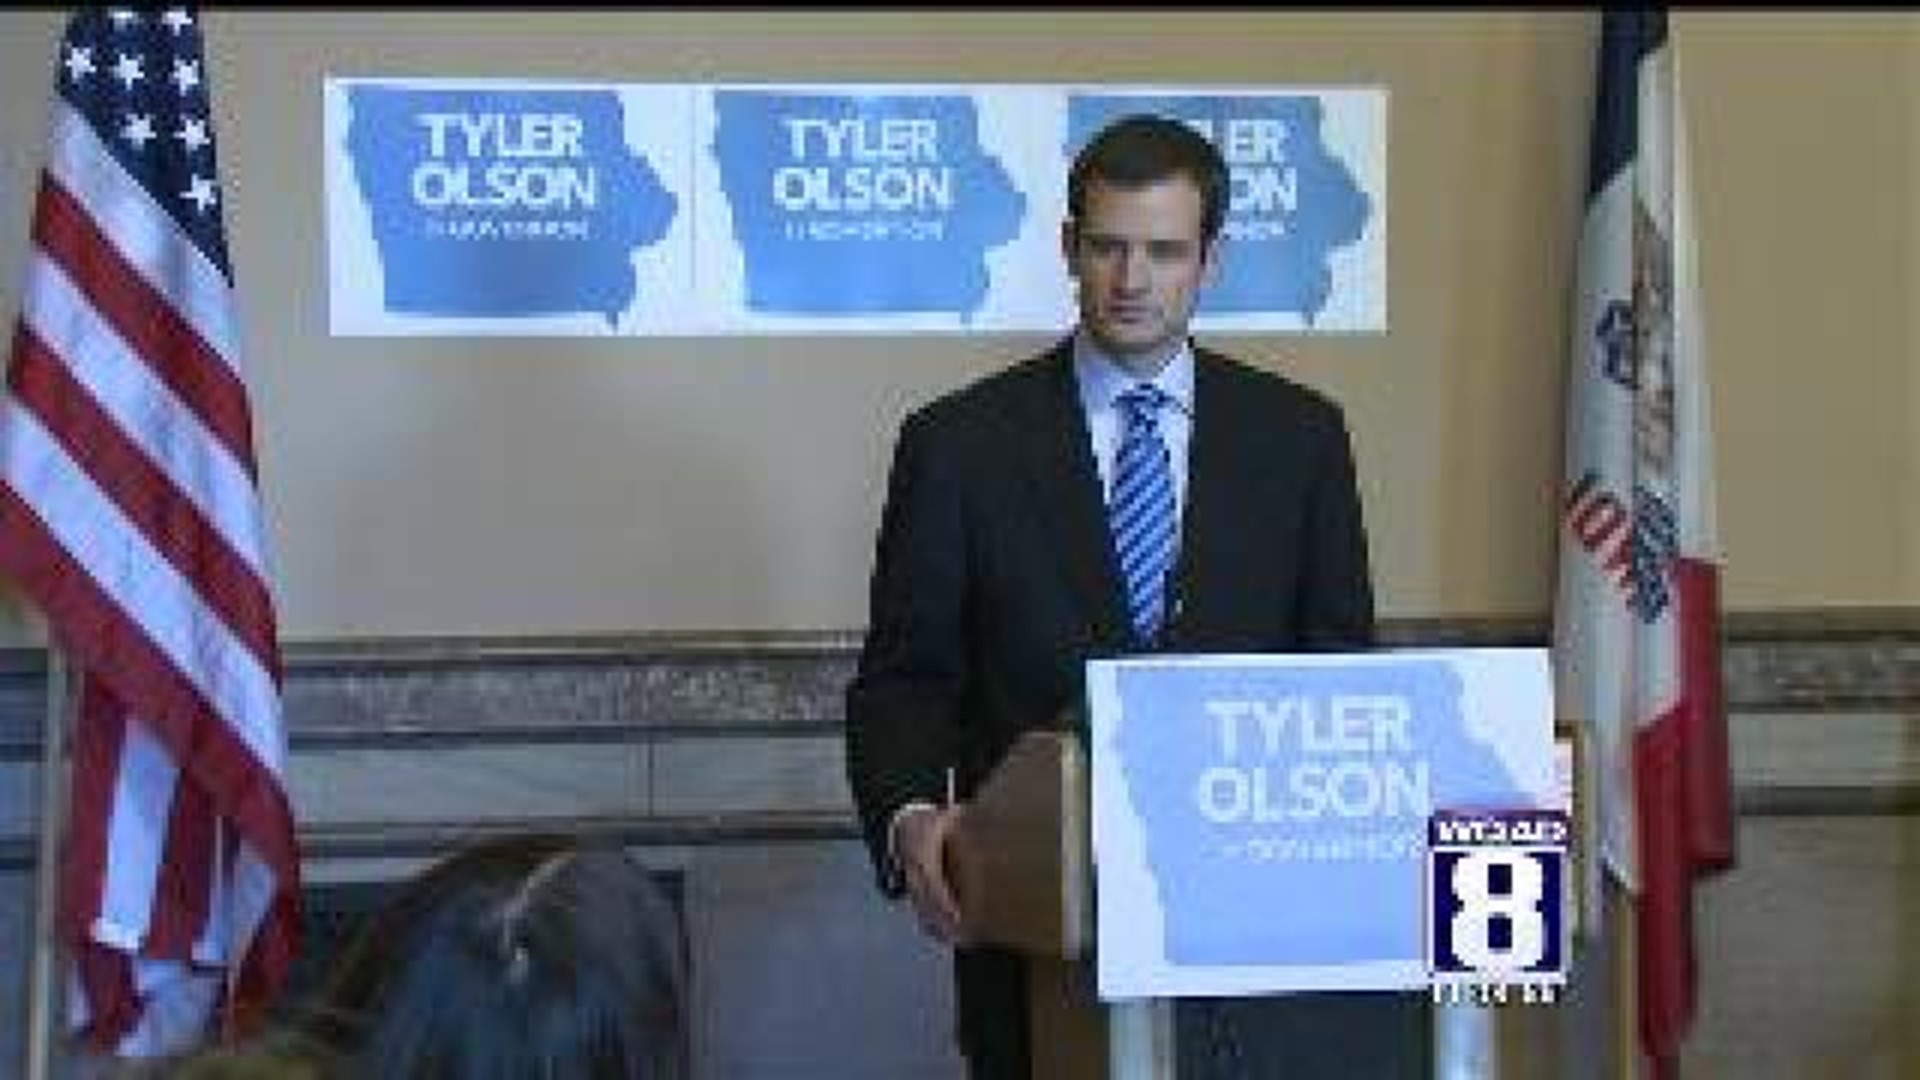 Tyler Olson campaign visit